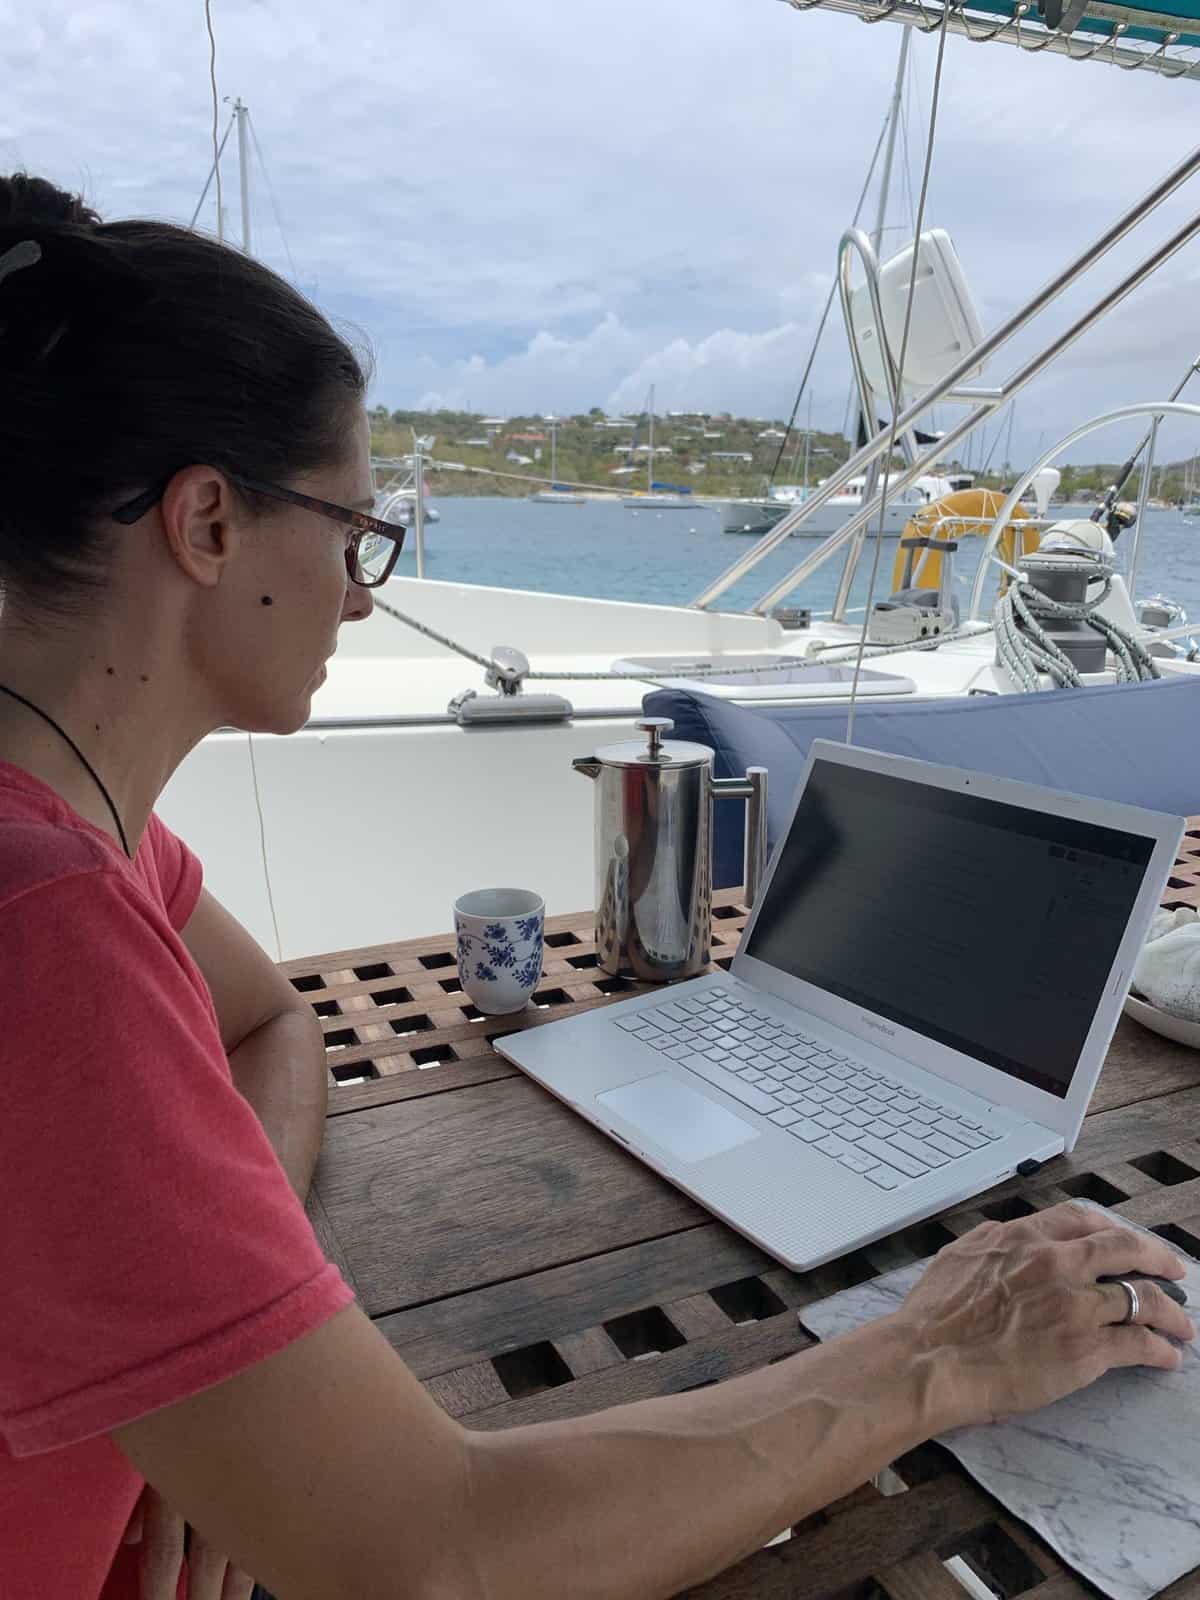 Mina on her laptop at the boat. In the process of writing the fun and useful traveling blog